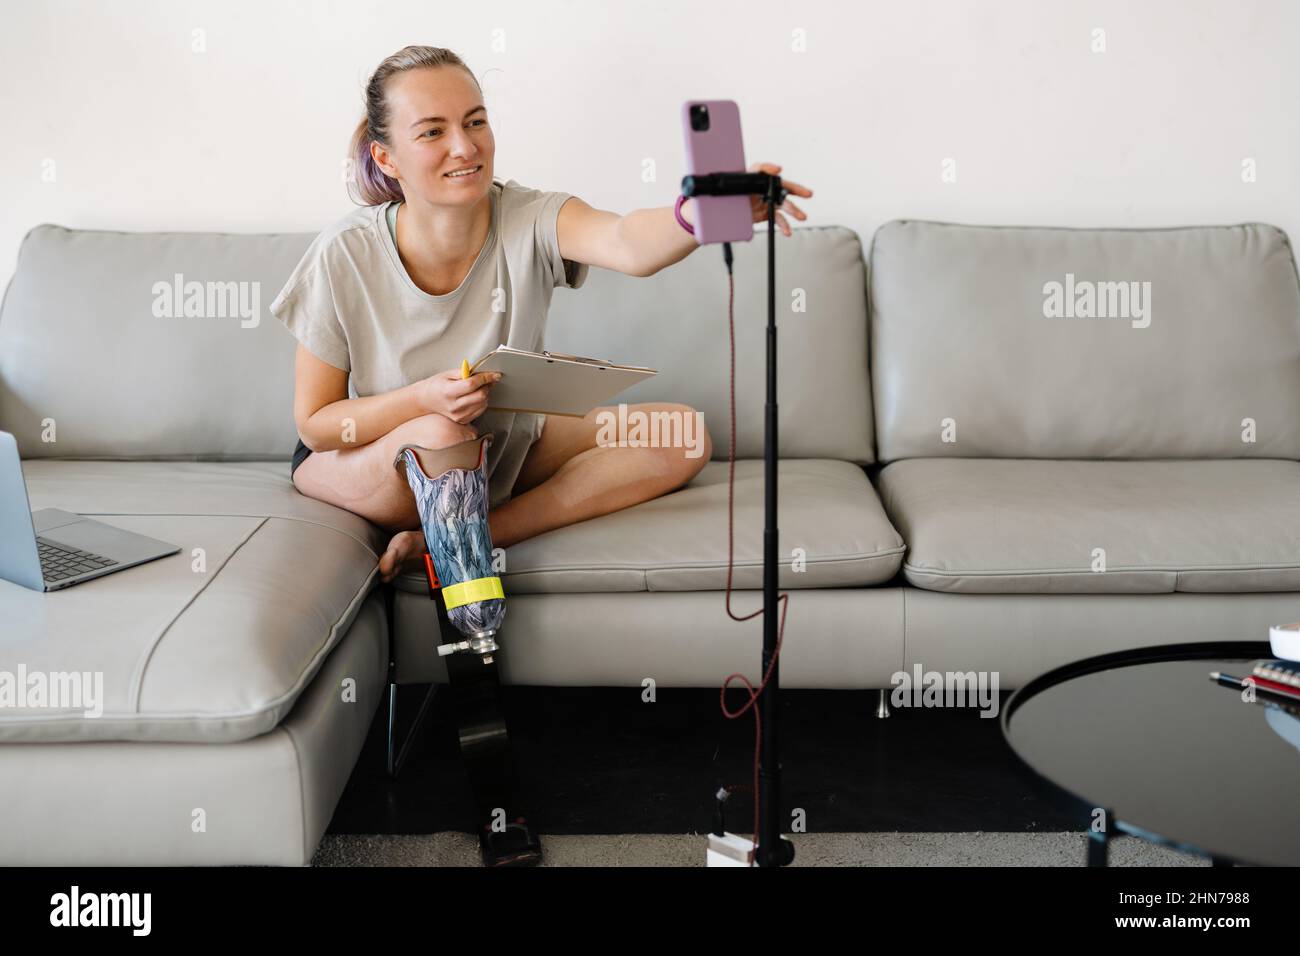 Smiling Young Woman With Prosthetic Leg Using Laptop In Living